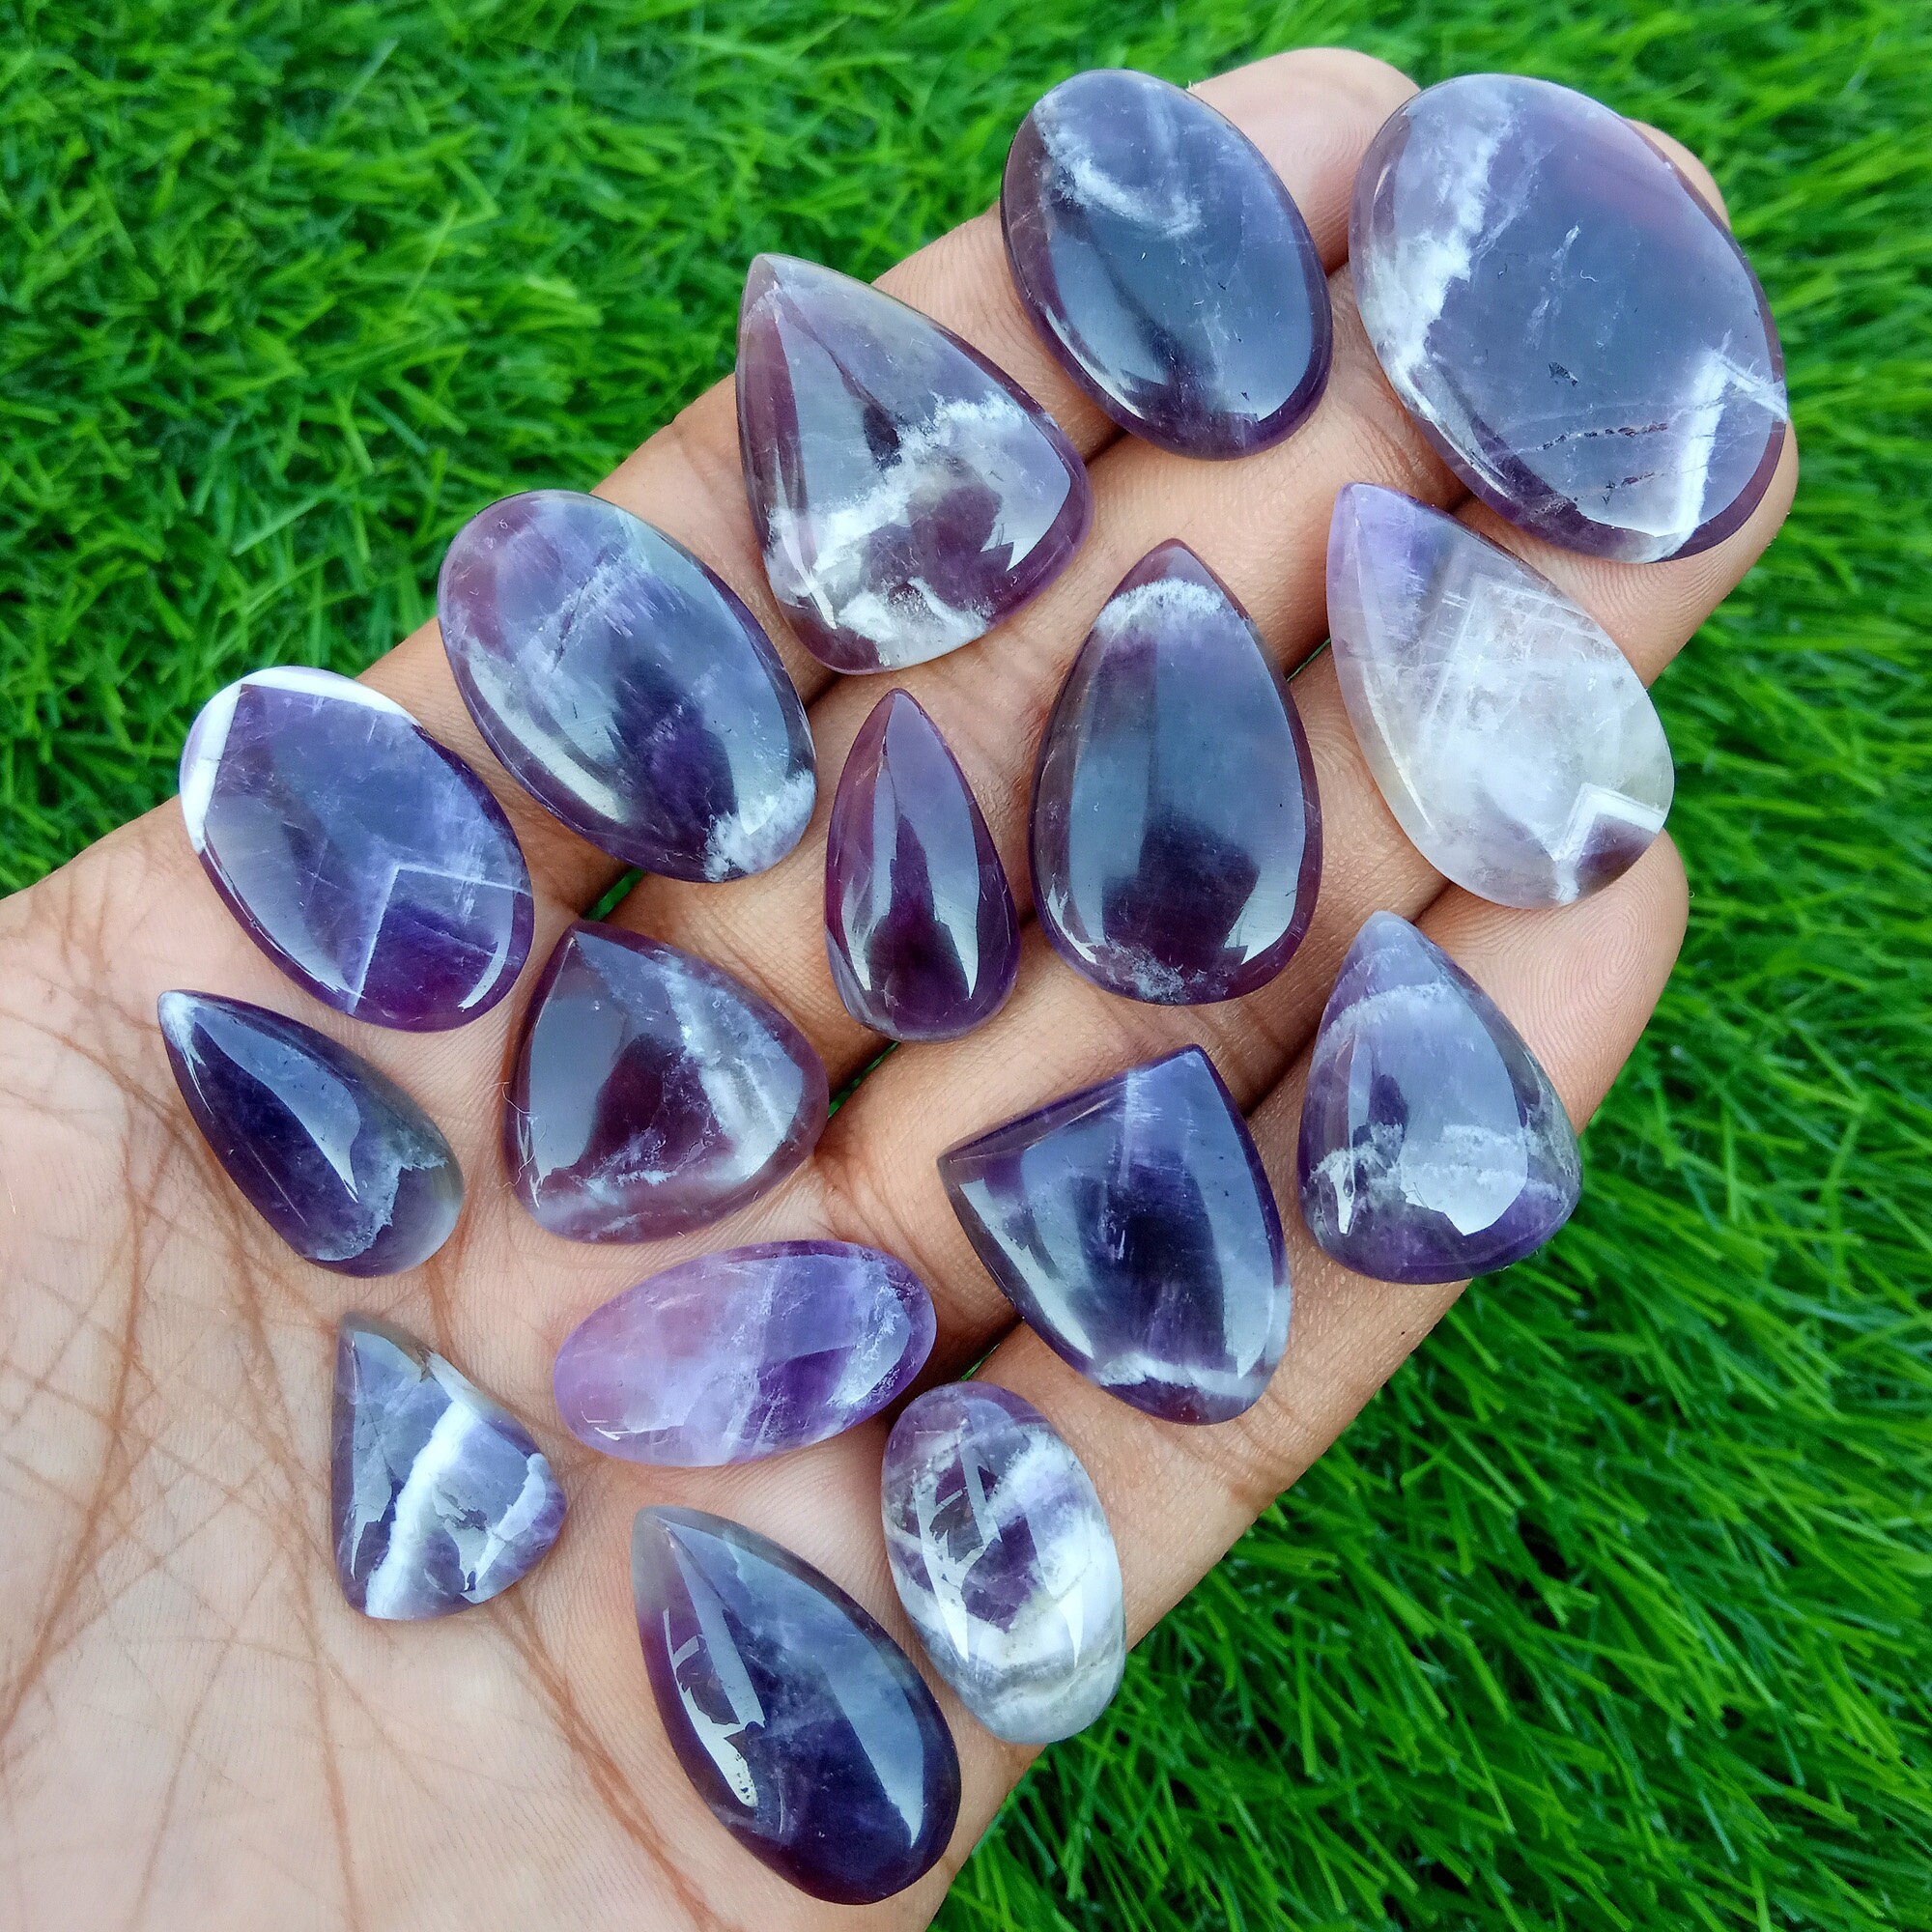 Top Quality Natural Lace Amethyst Lot Cabochon Loose Gemstone Wholesale Lot 15 Pieces Size 20-29 mm Beautiful Cabochons Gemstones Lot